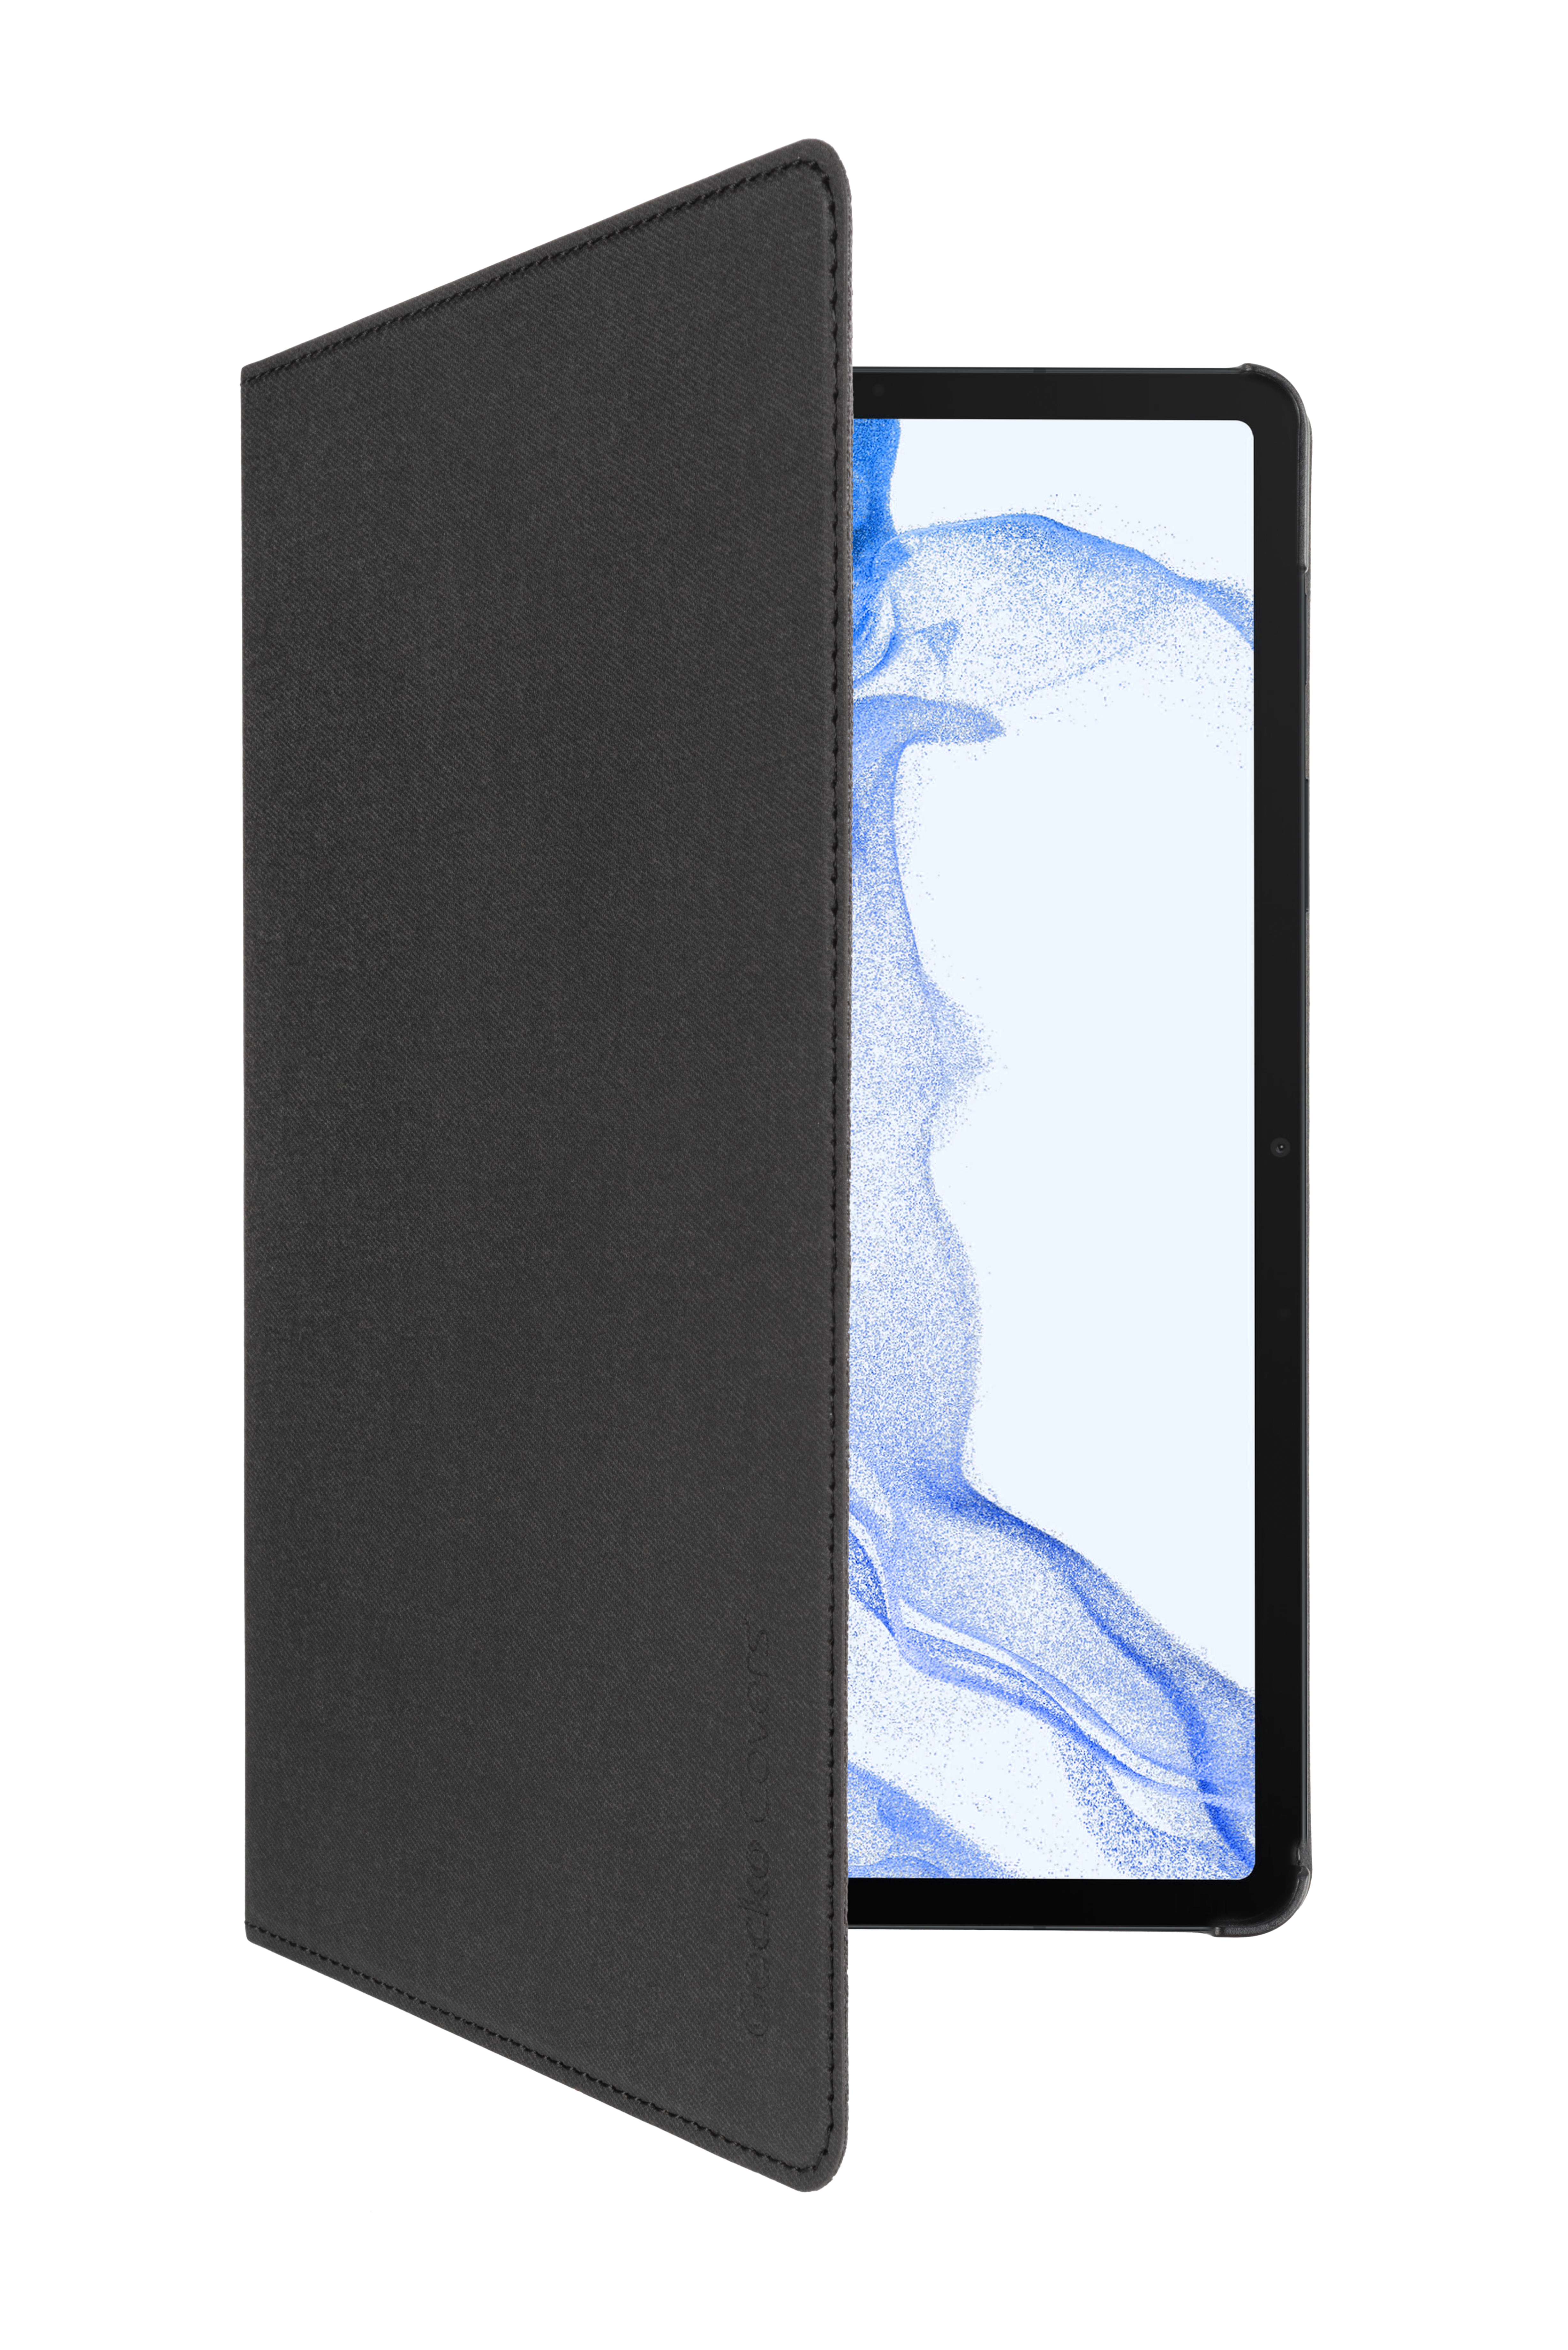 Black Leather, Hülle Tablet COVERS Samsung Bookcover 2.0 PU Easy-Click GECKO für